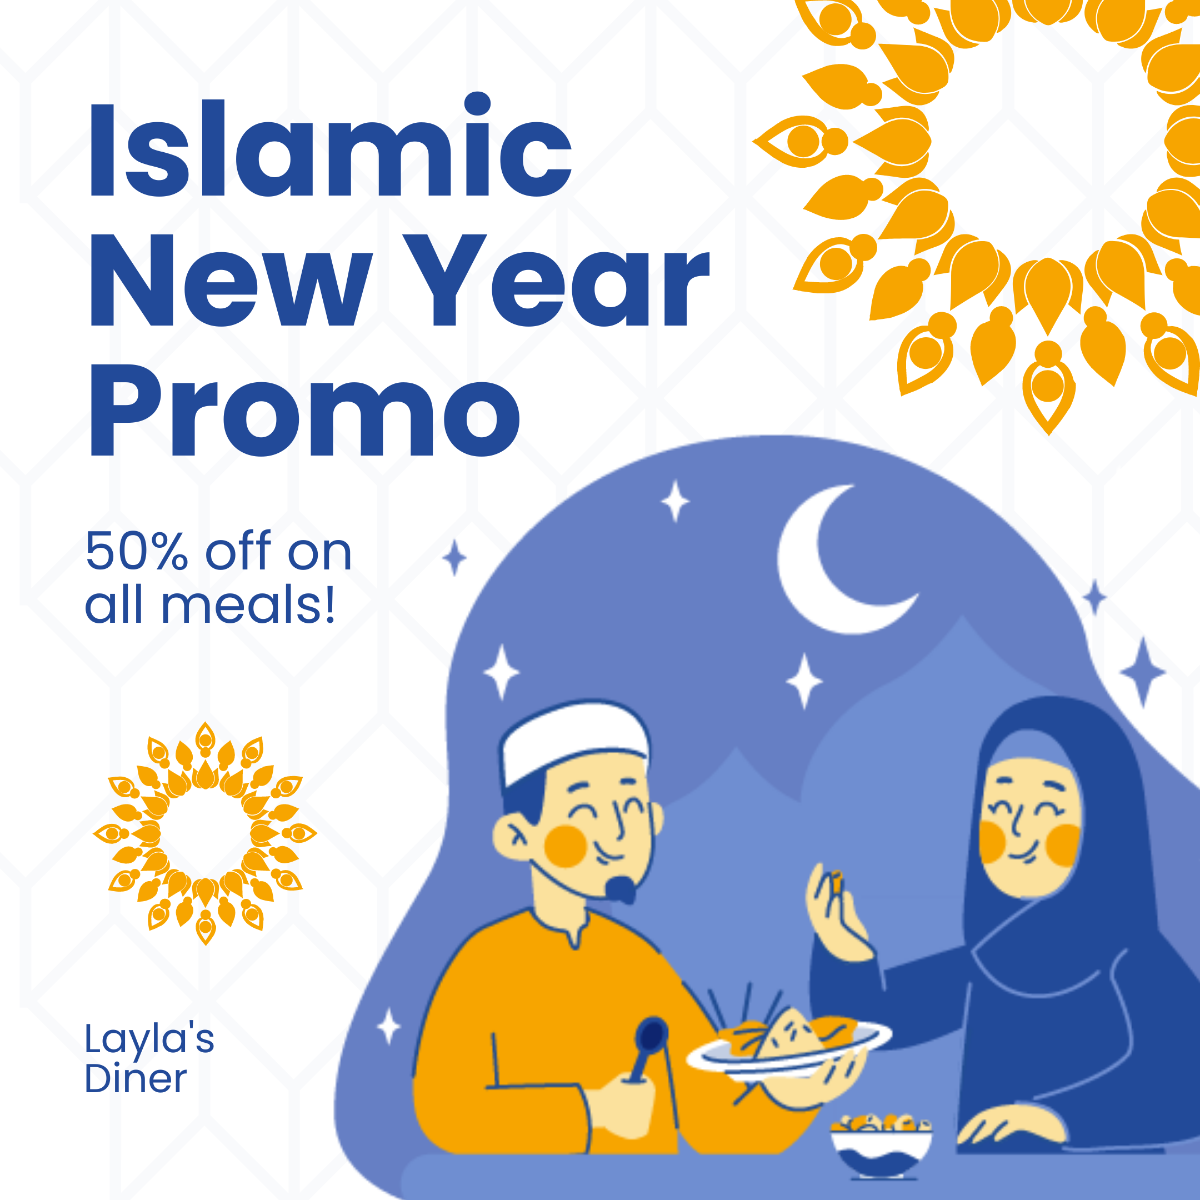 Islamic New Year Promotional Instagram Post